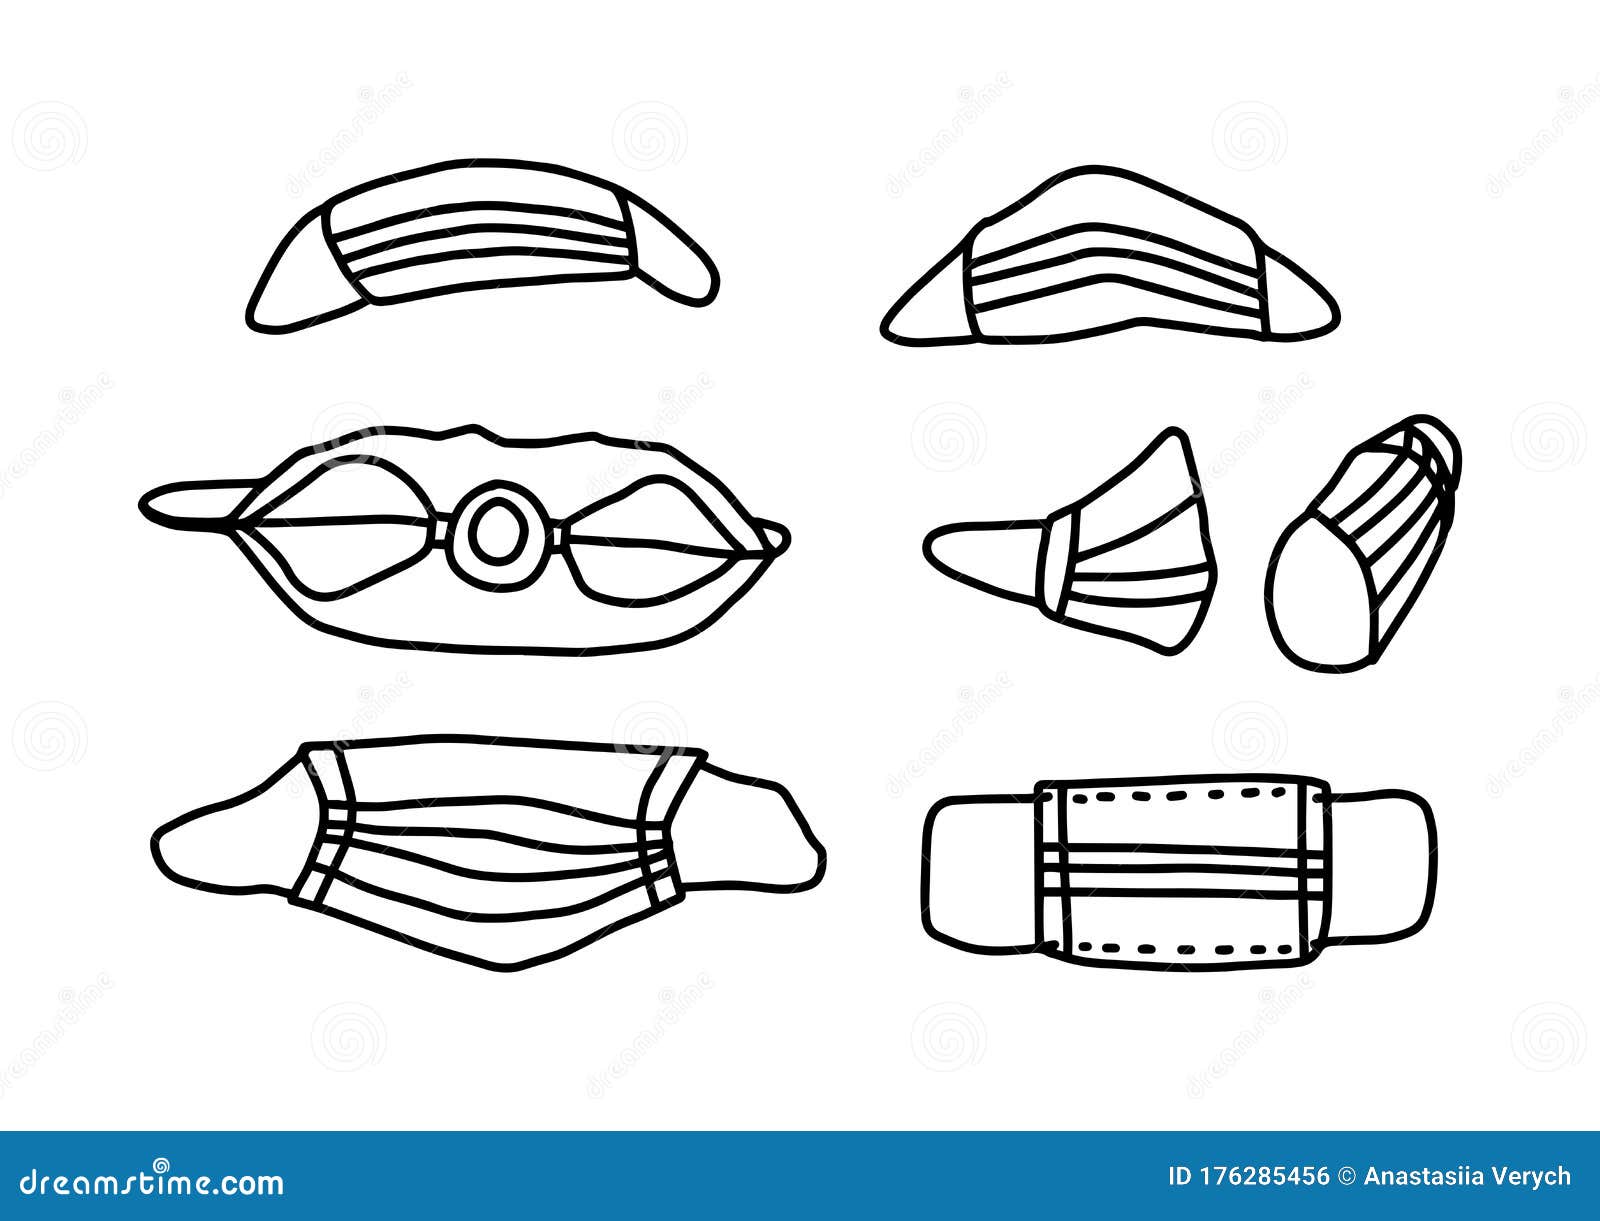 Medical Mask for Protection Against Diseases in Hand Drawn Doodle Style ...